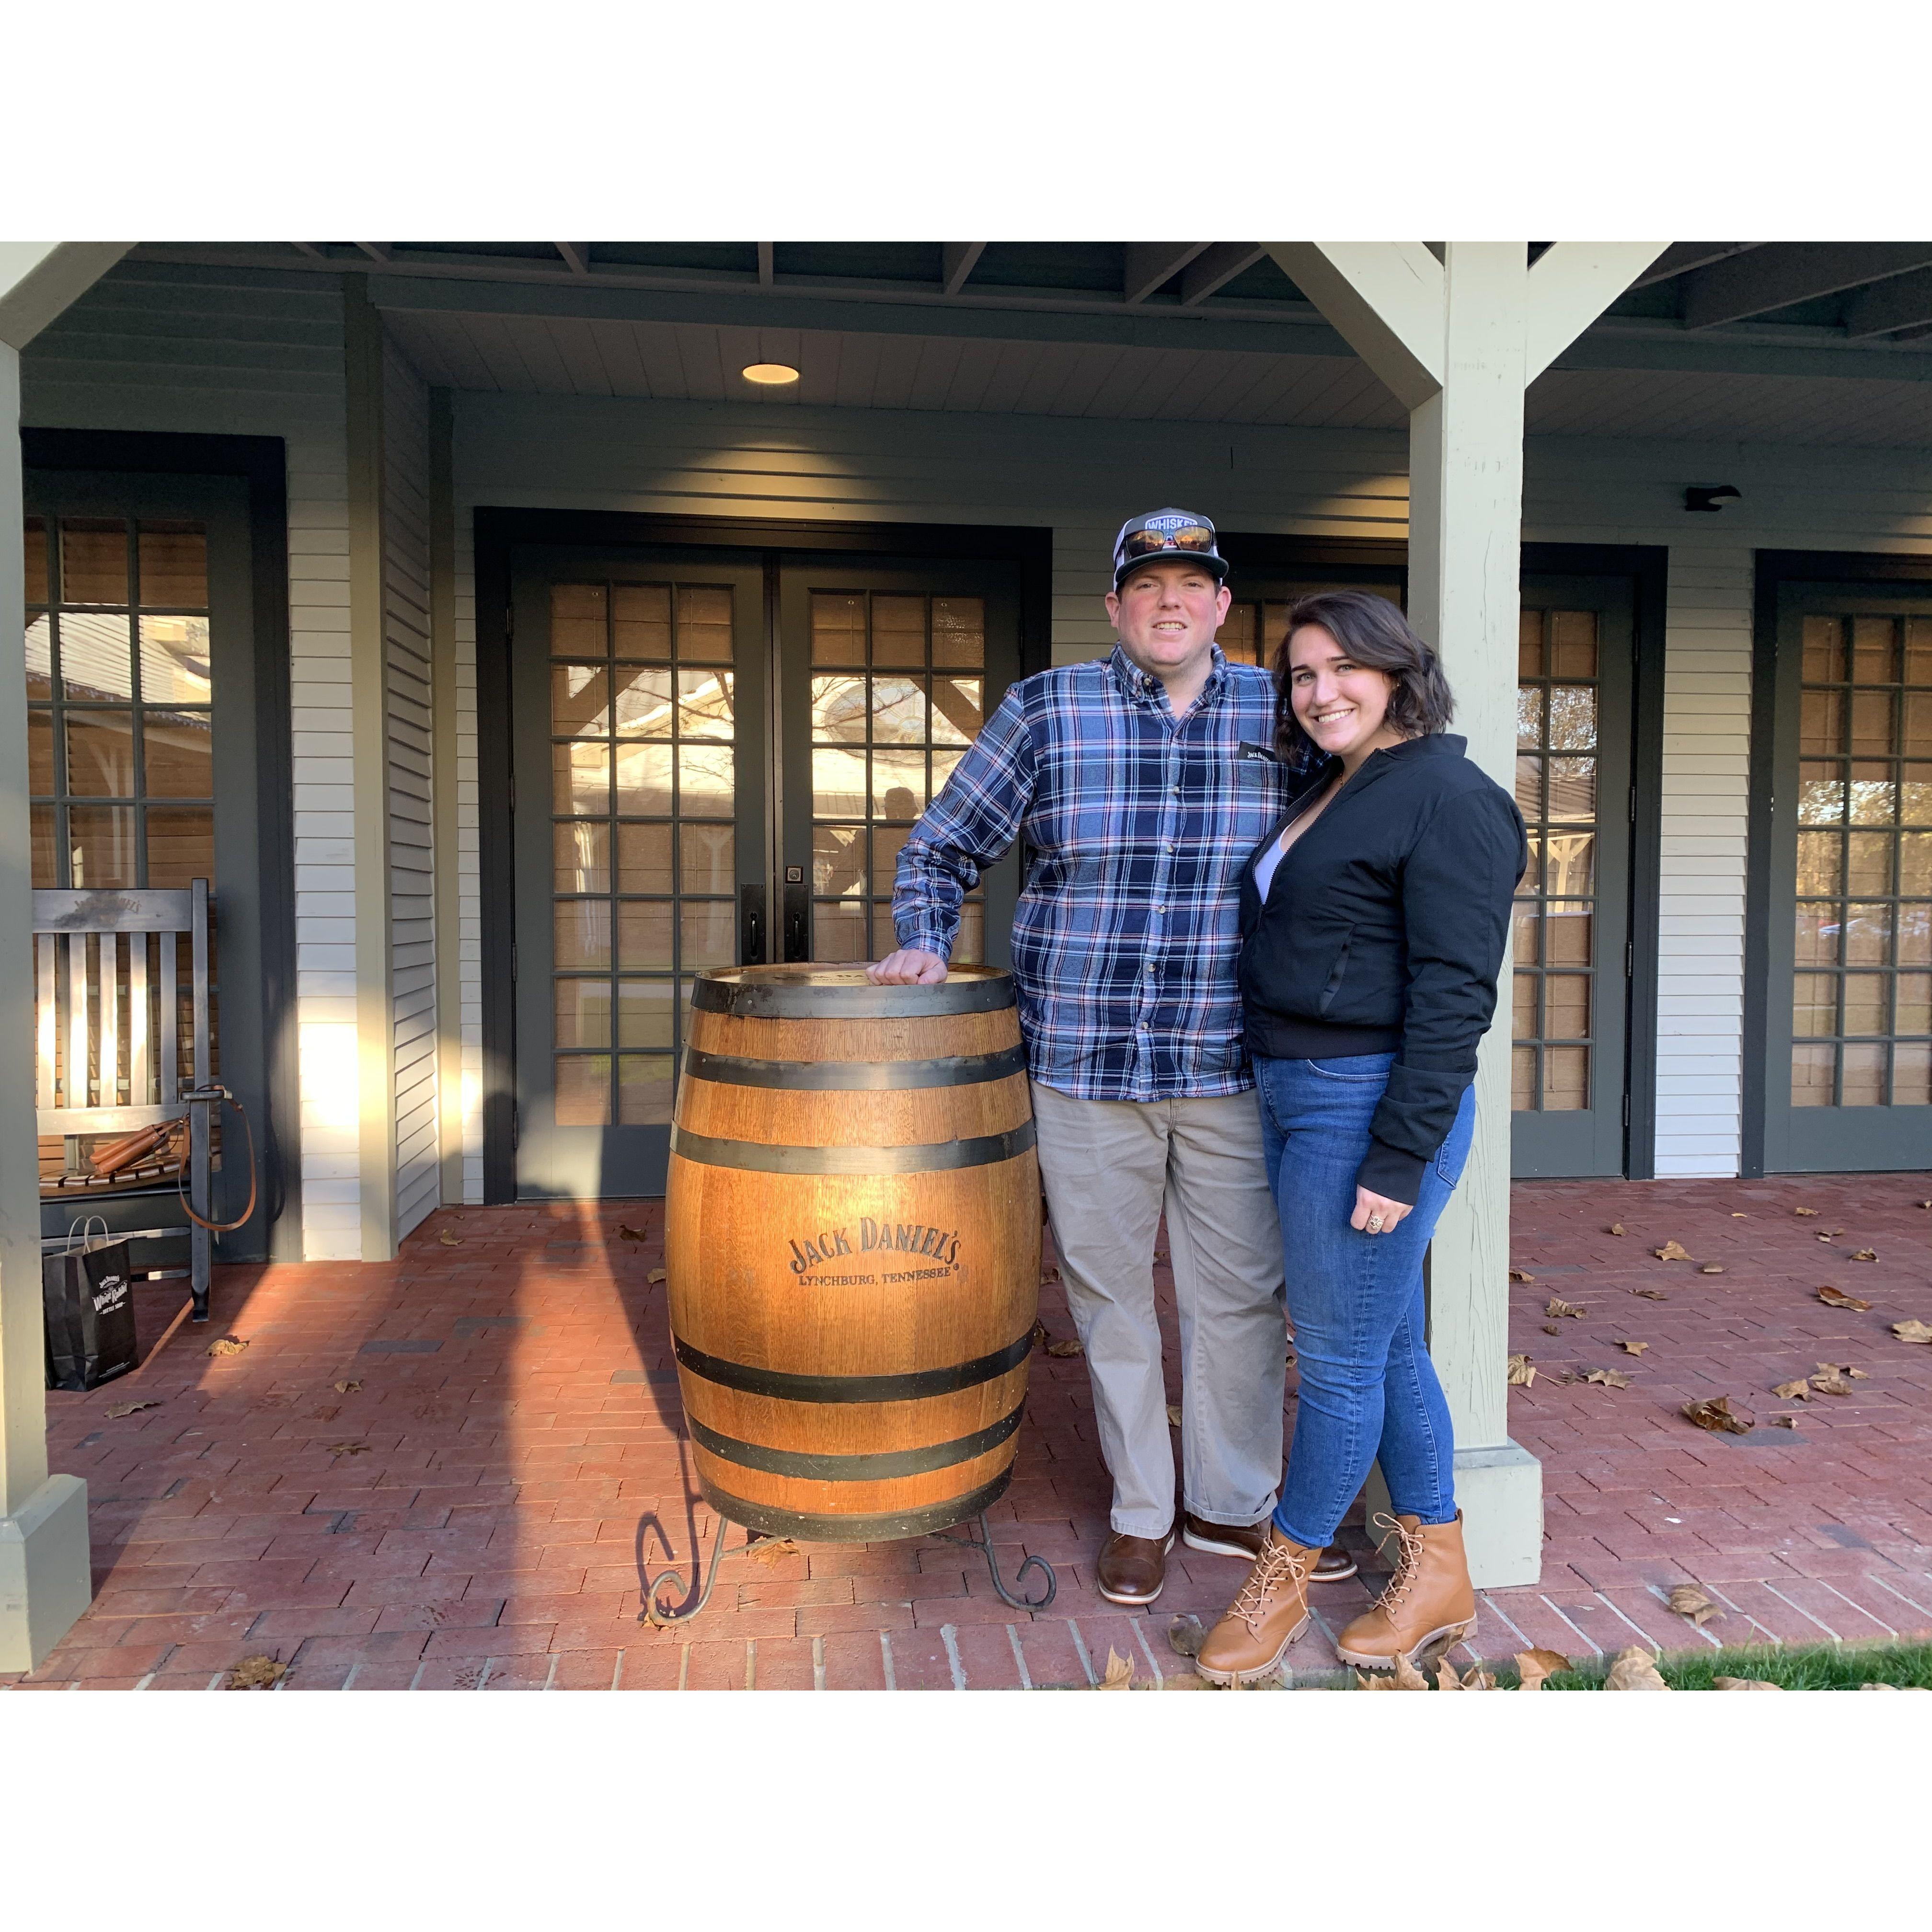 Fun trip to Lynchburg, Tennessee to drink whiskey (which Elizabeth hated, but Trevor loved).